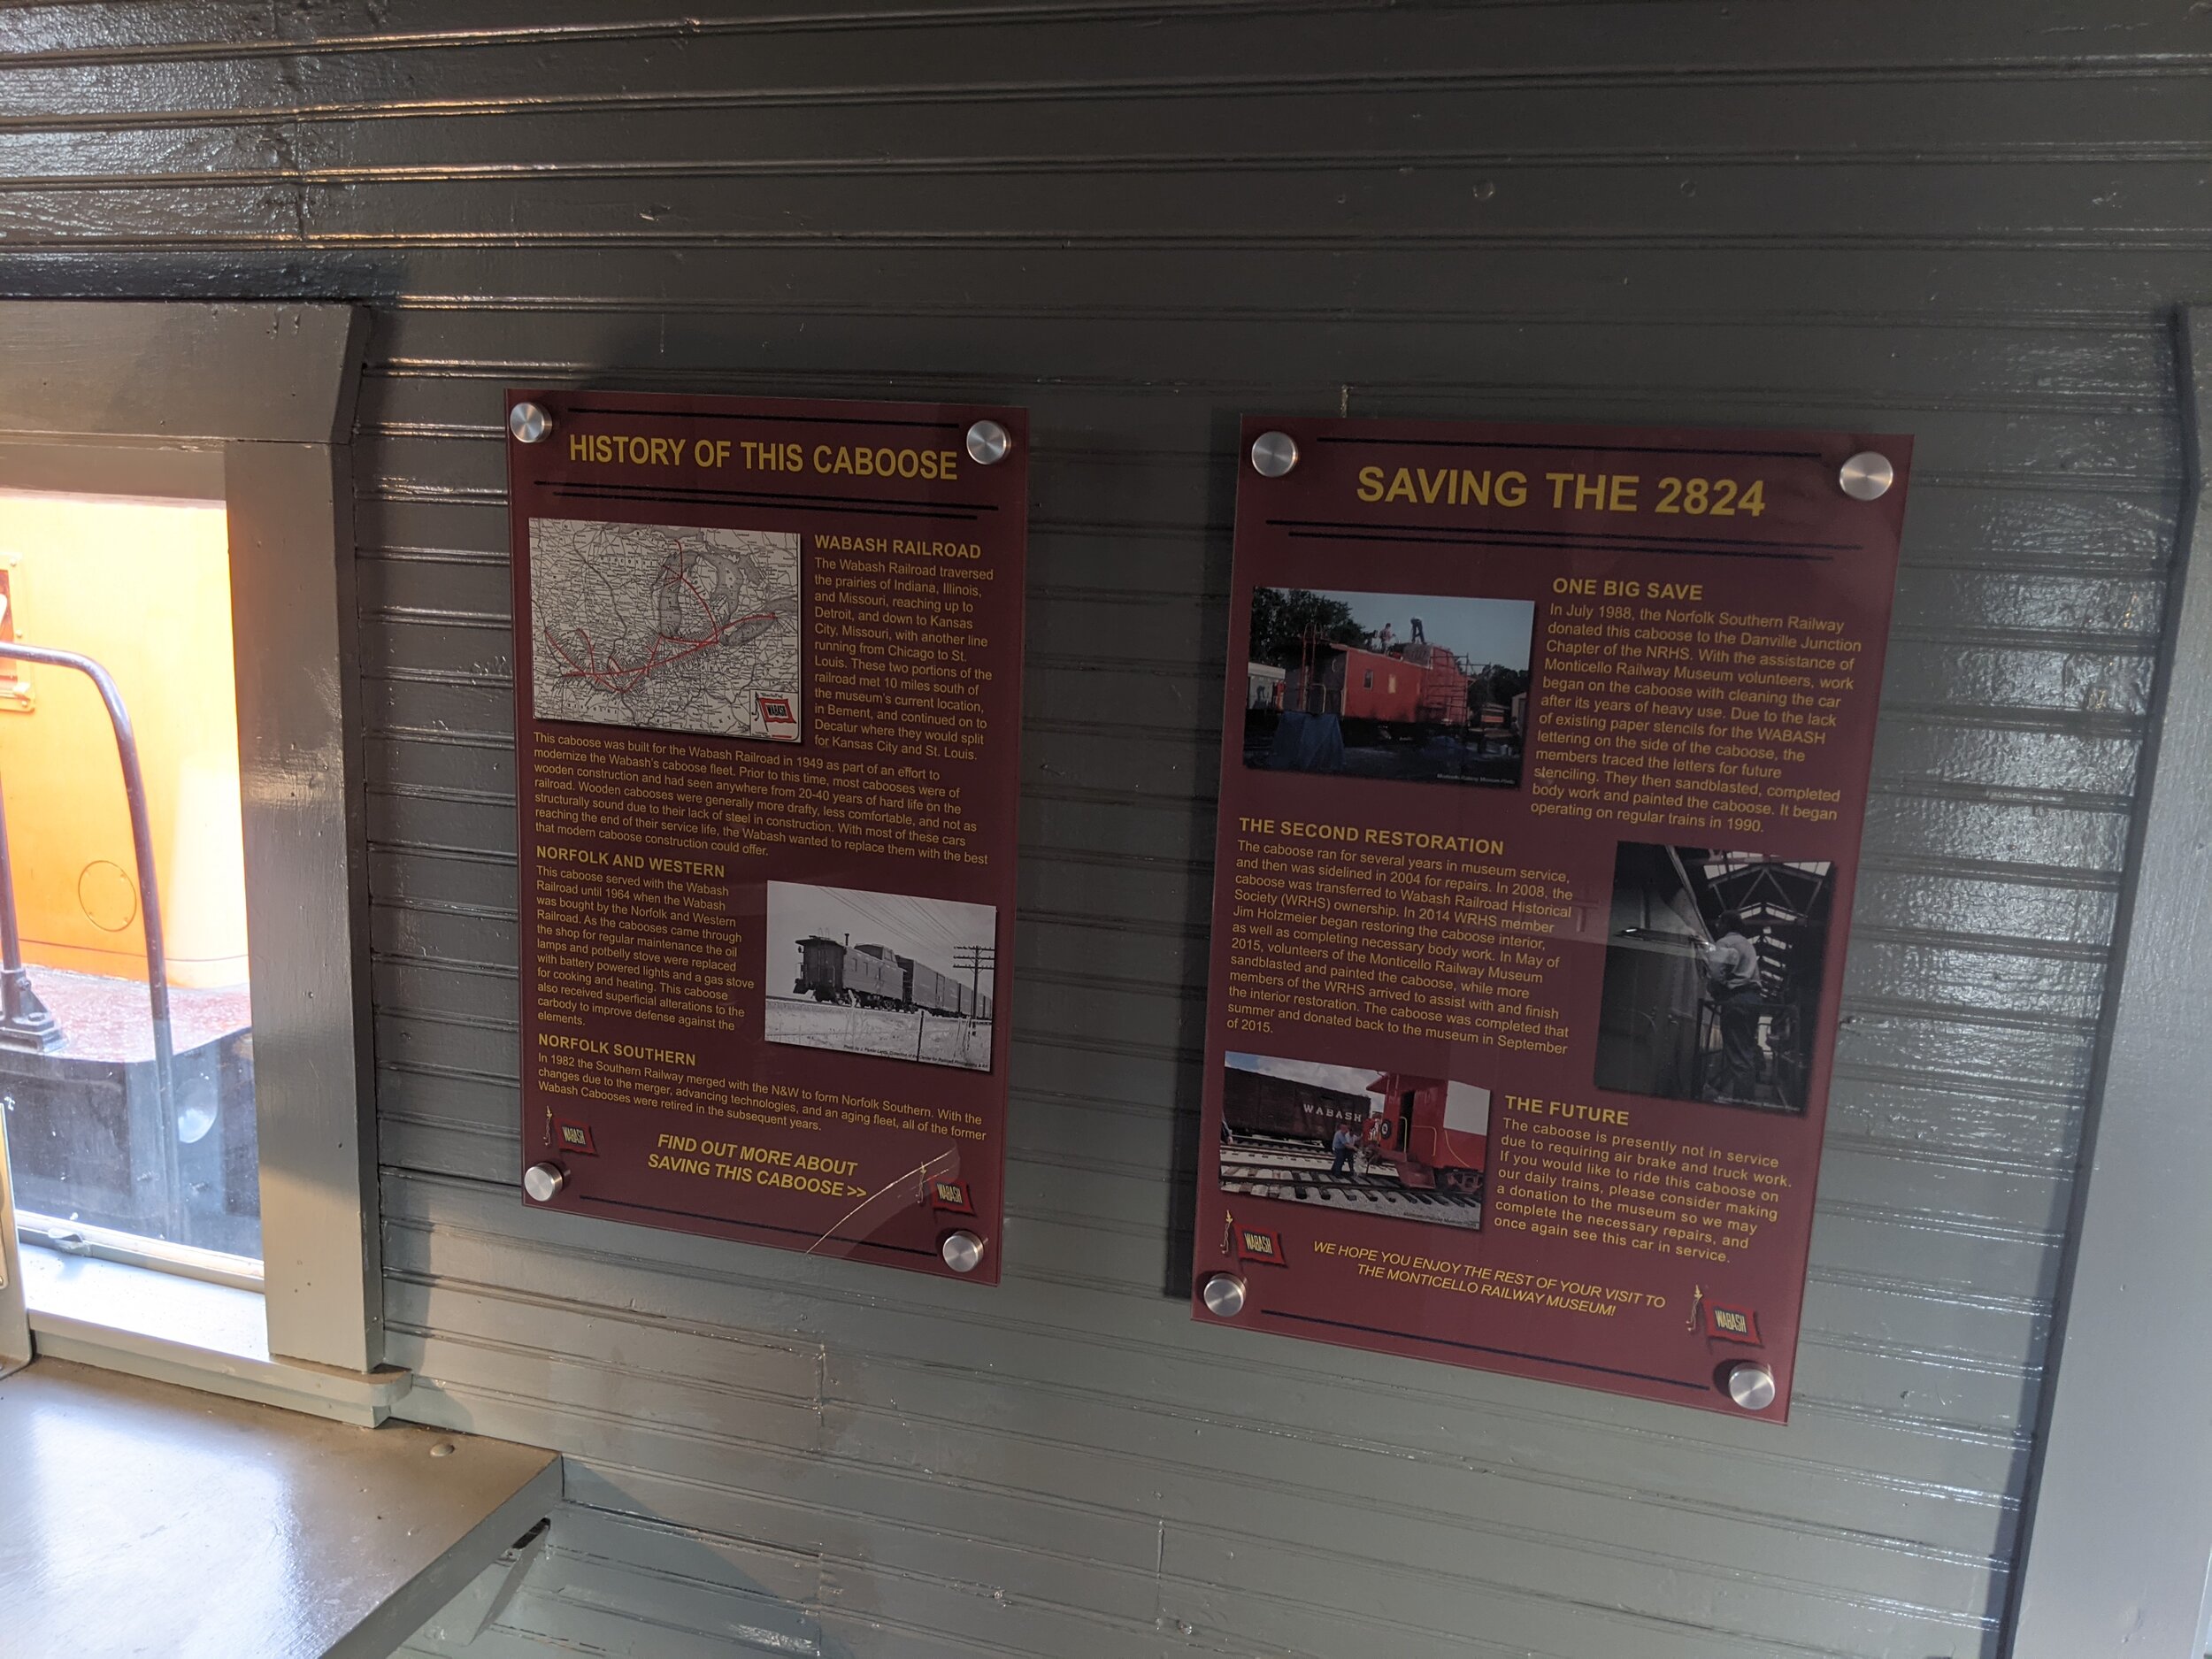  The exhibits are installed inside the #2824 caboose.  